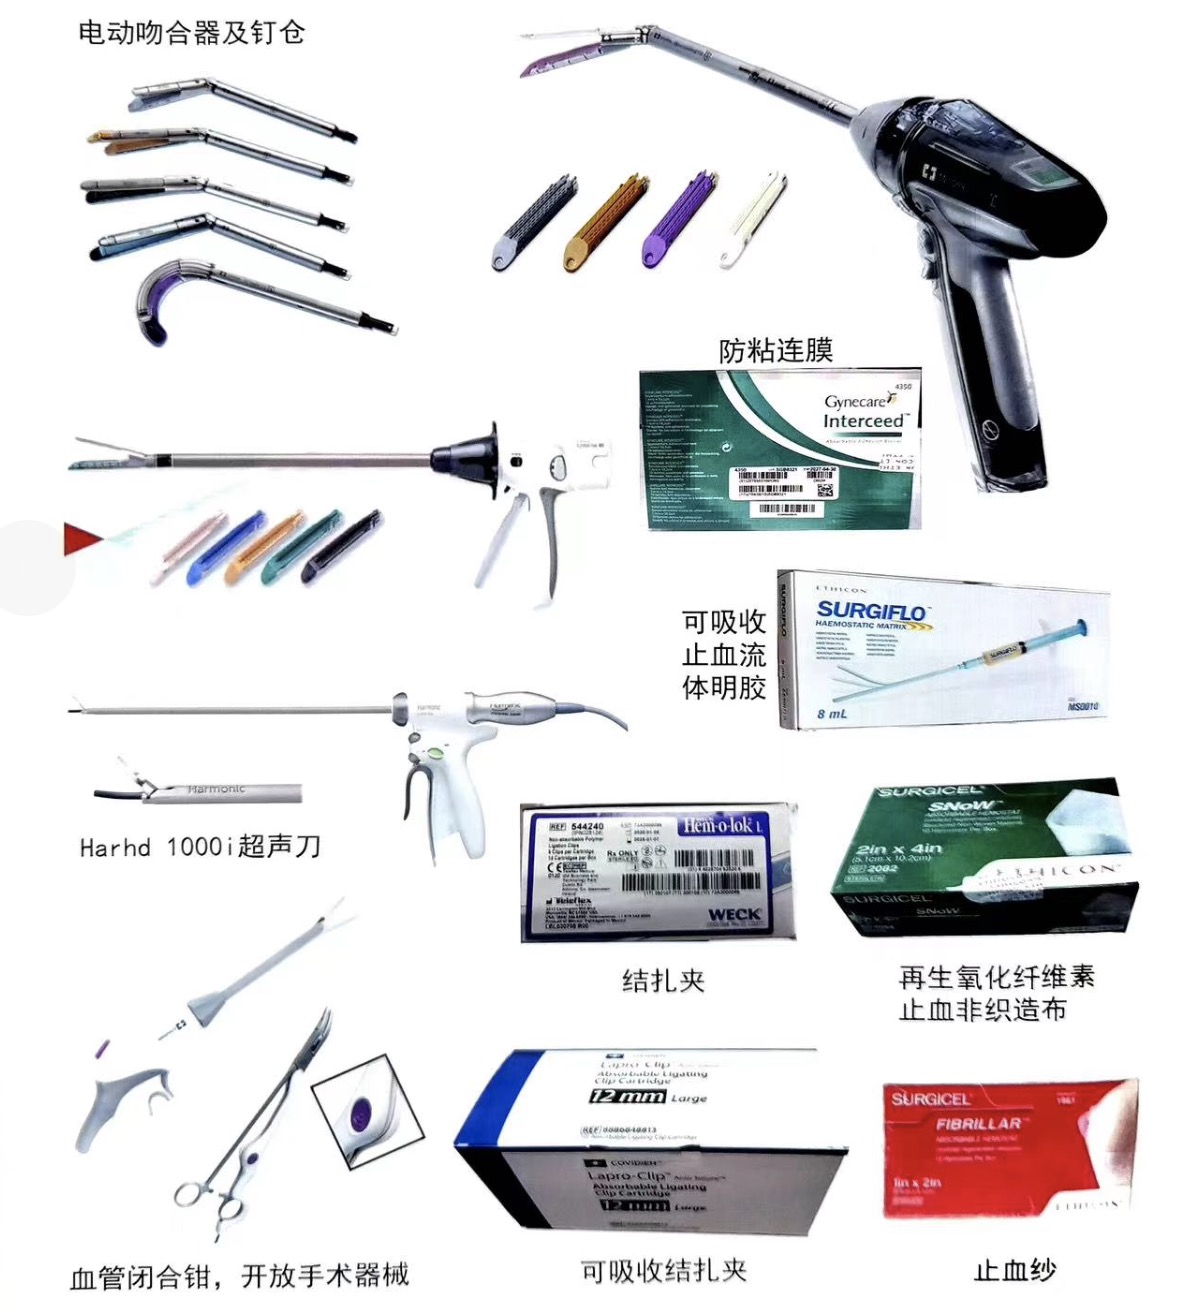 sutures;staplers;electrodes and other medical equipments